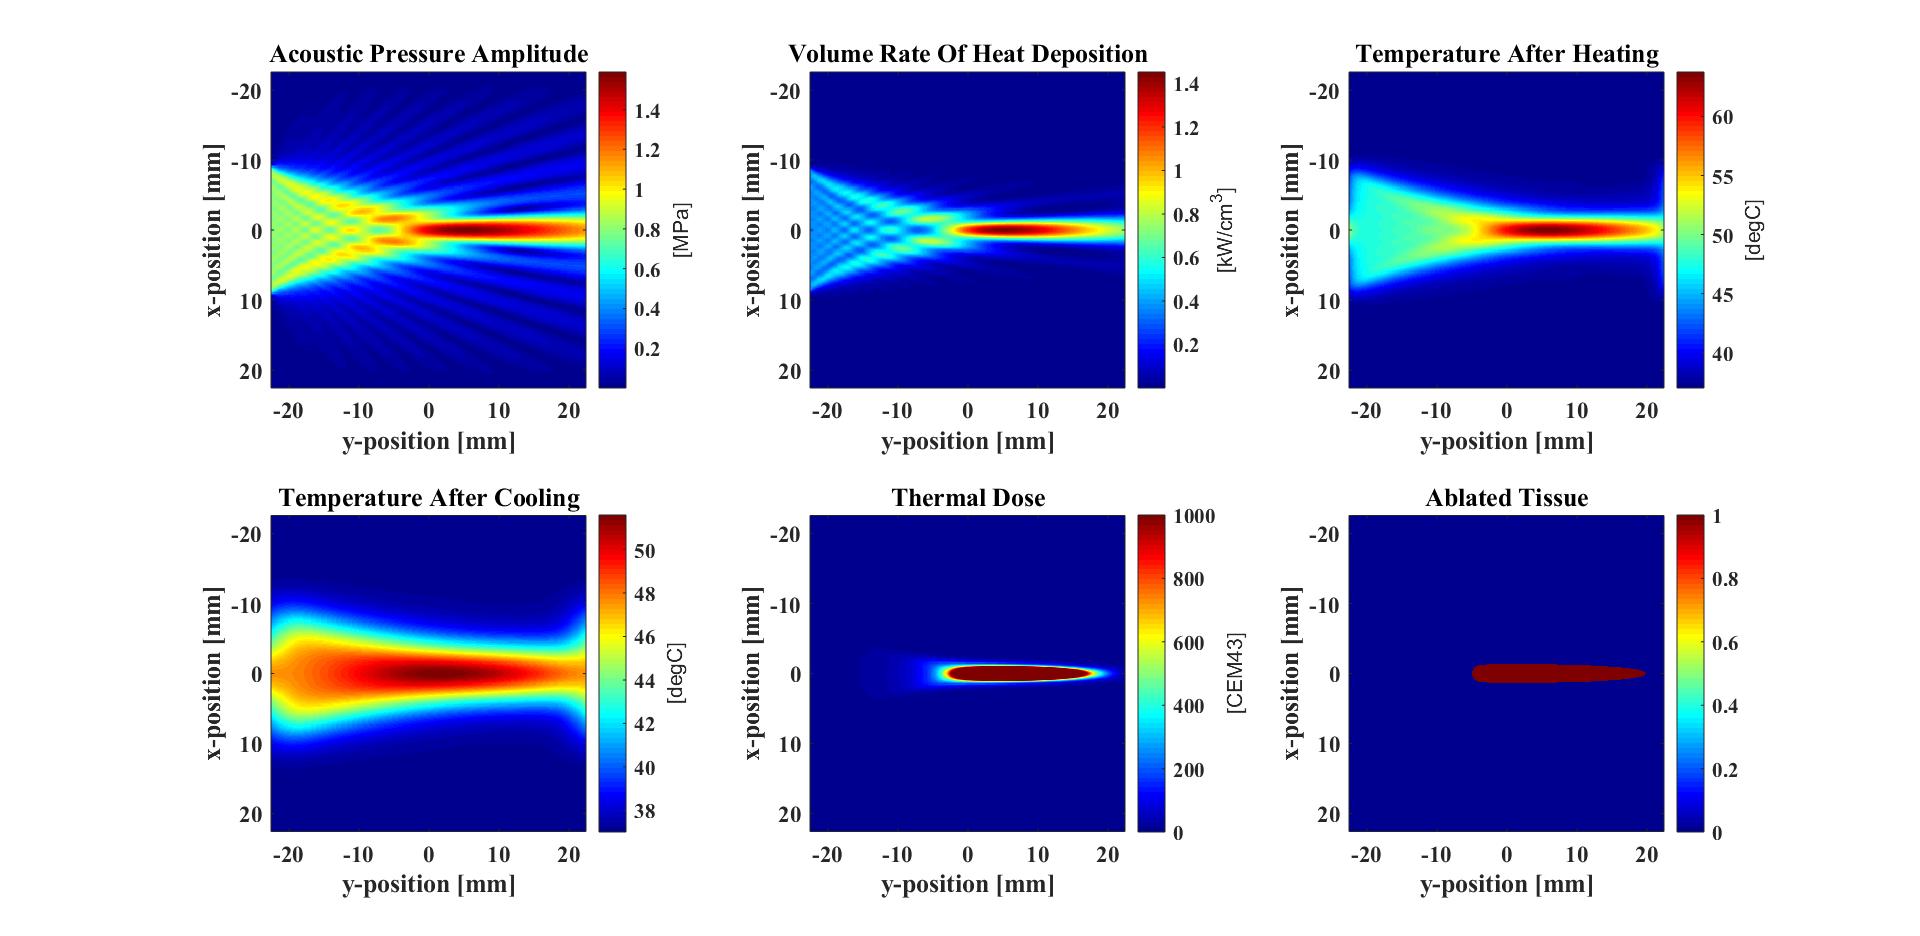 The resulting pressure, volume rate of heat deposition, 
                                                            temperature field, thermal dose, and ablation volume